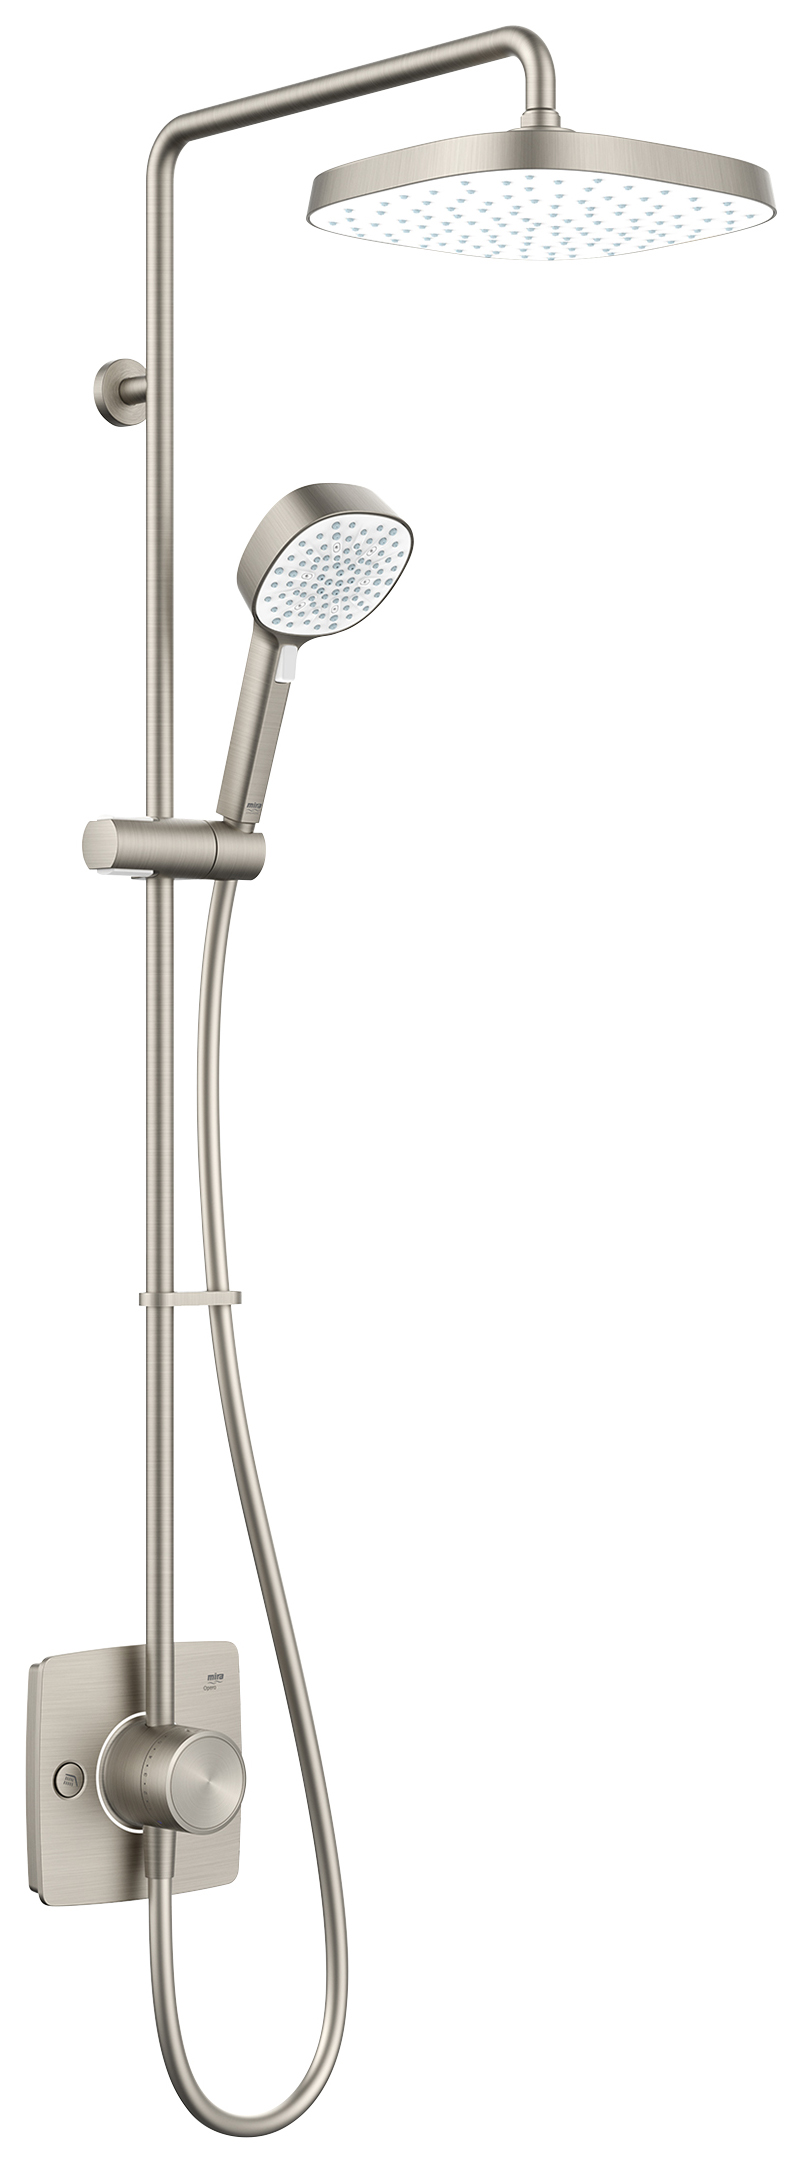 Image of Mira Opero Dual Outlet Mixer Shower with HydroGlo Technology - Brushed Nickel